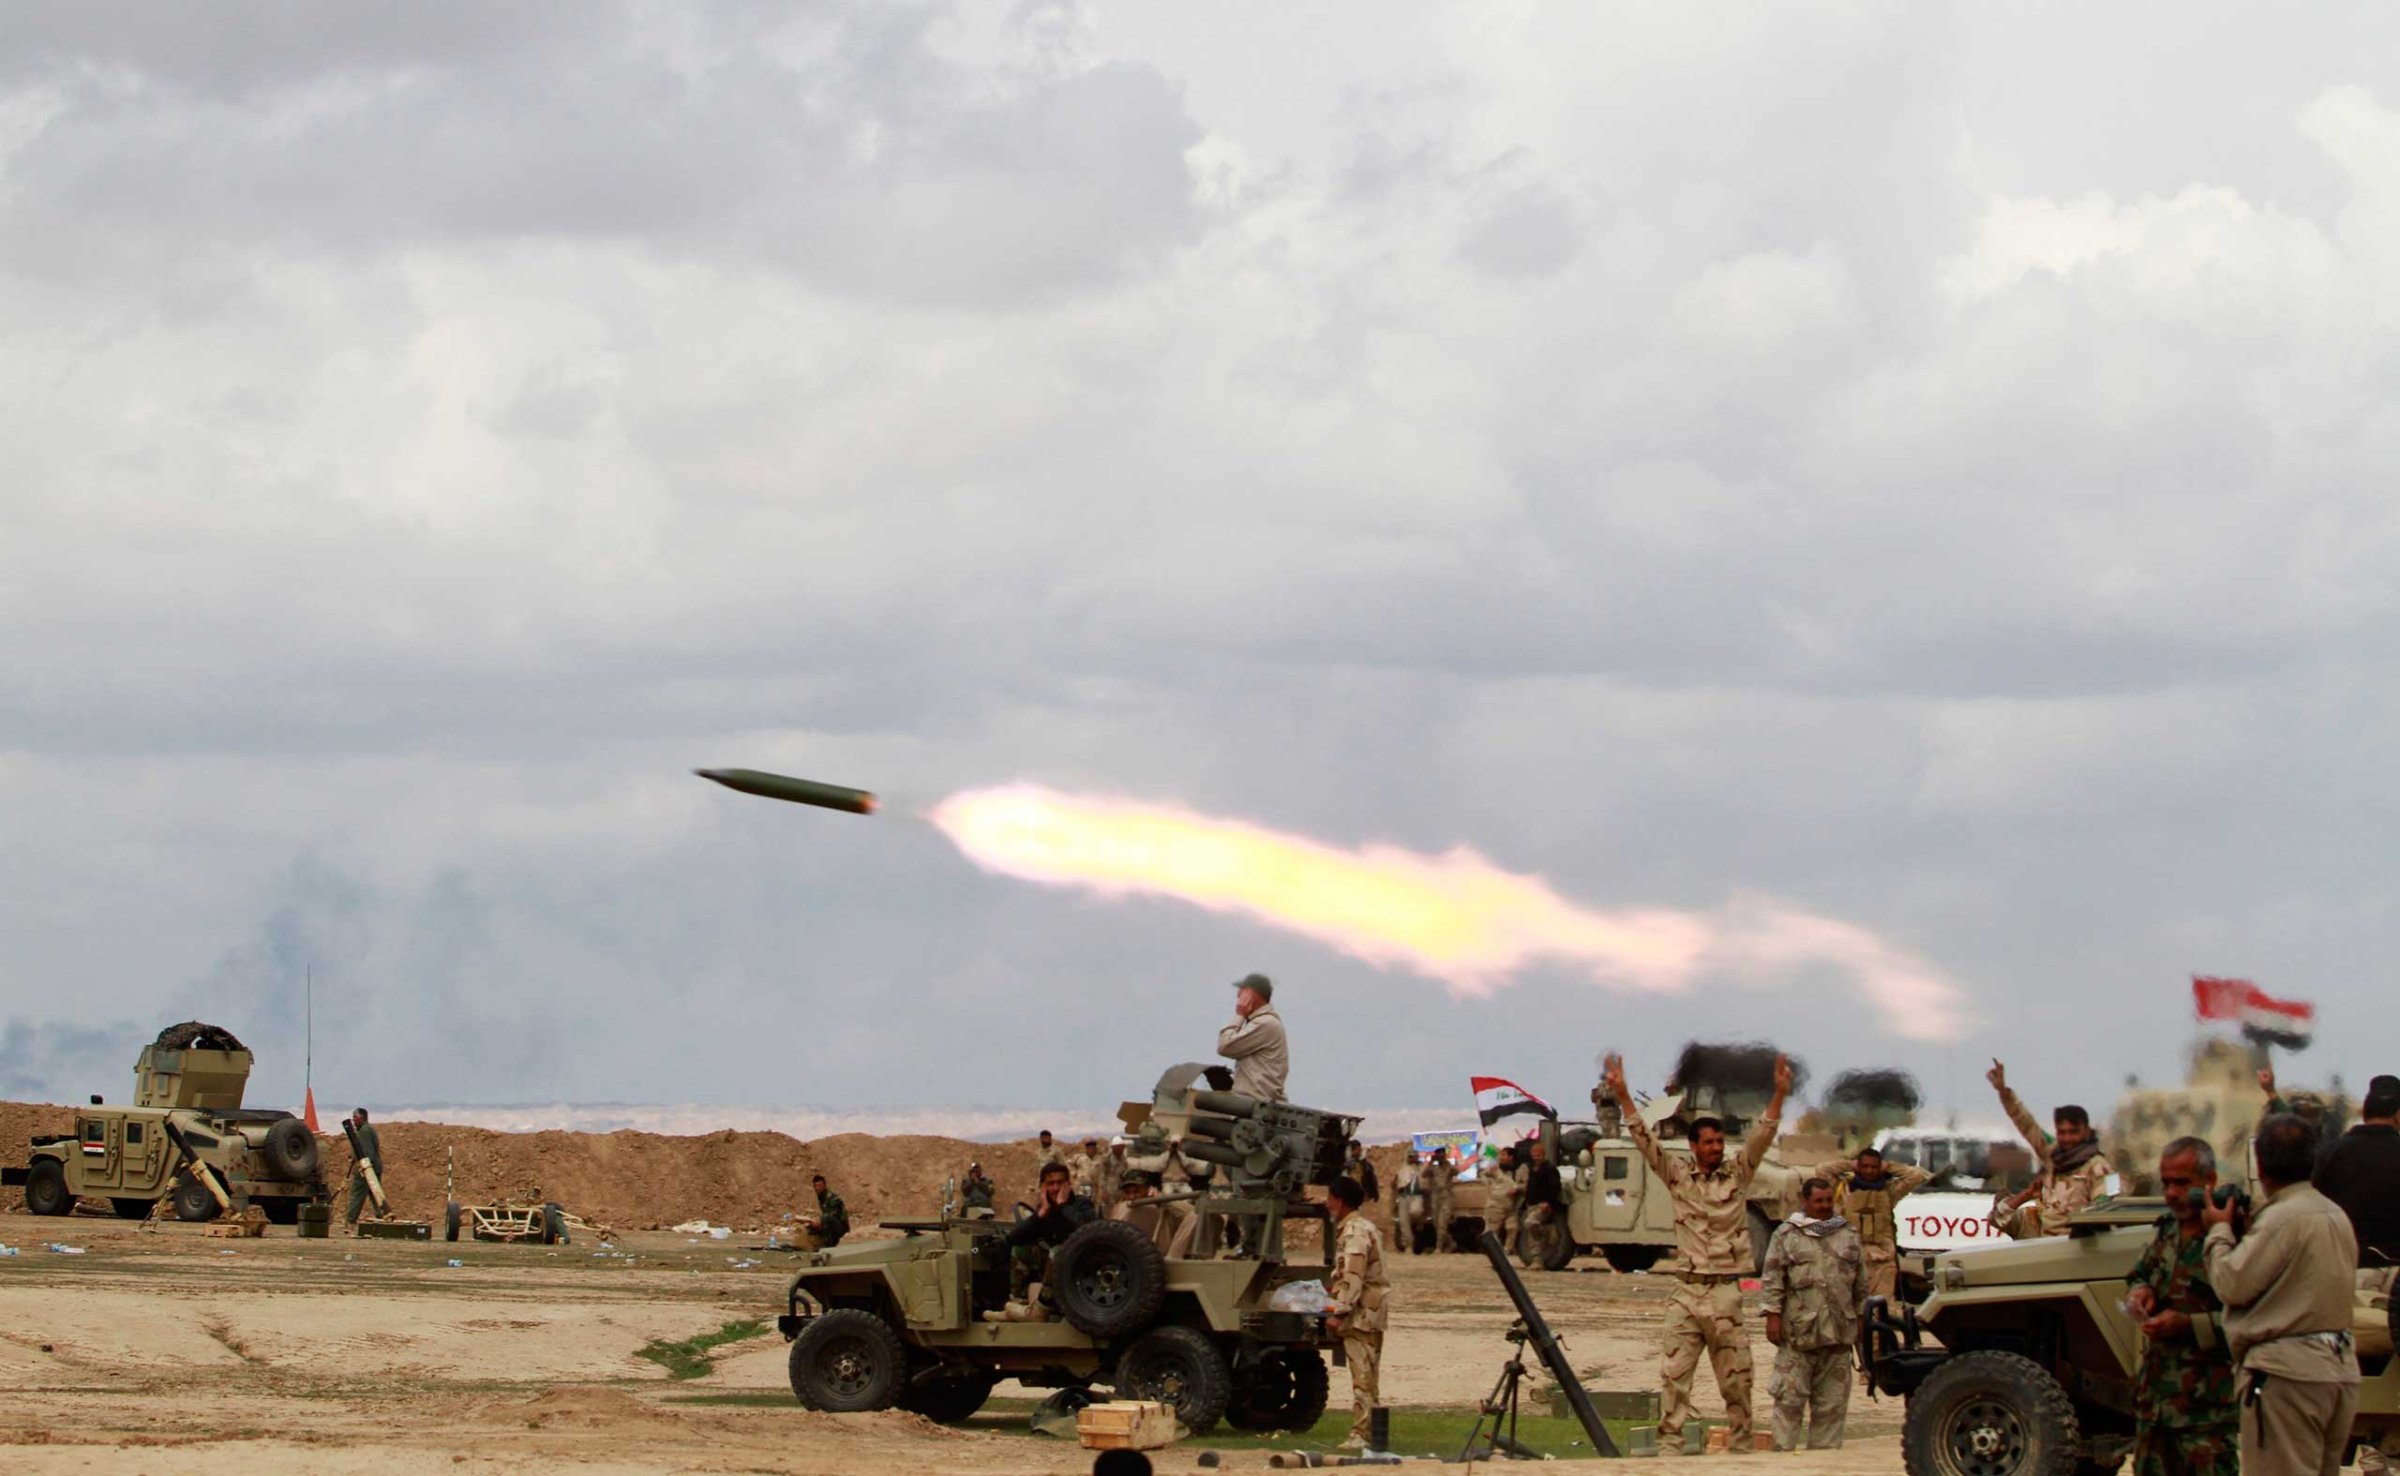 Shi’ite fighters launch a rocket towards ISIS militants during heavy fighting in Salahuddin province, Iraq, March 4, 2015.